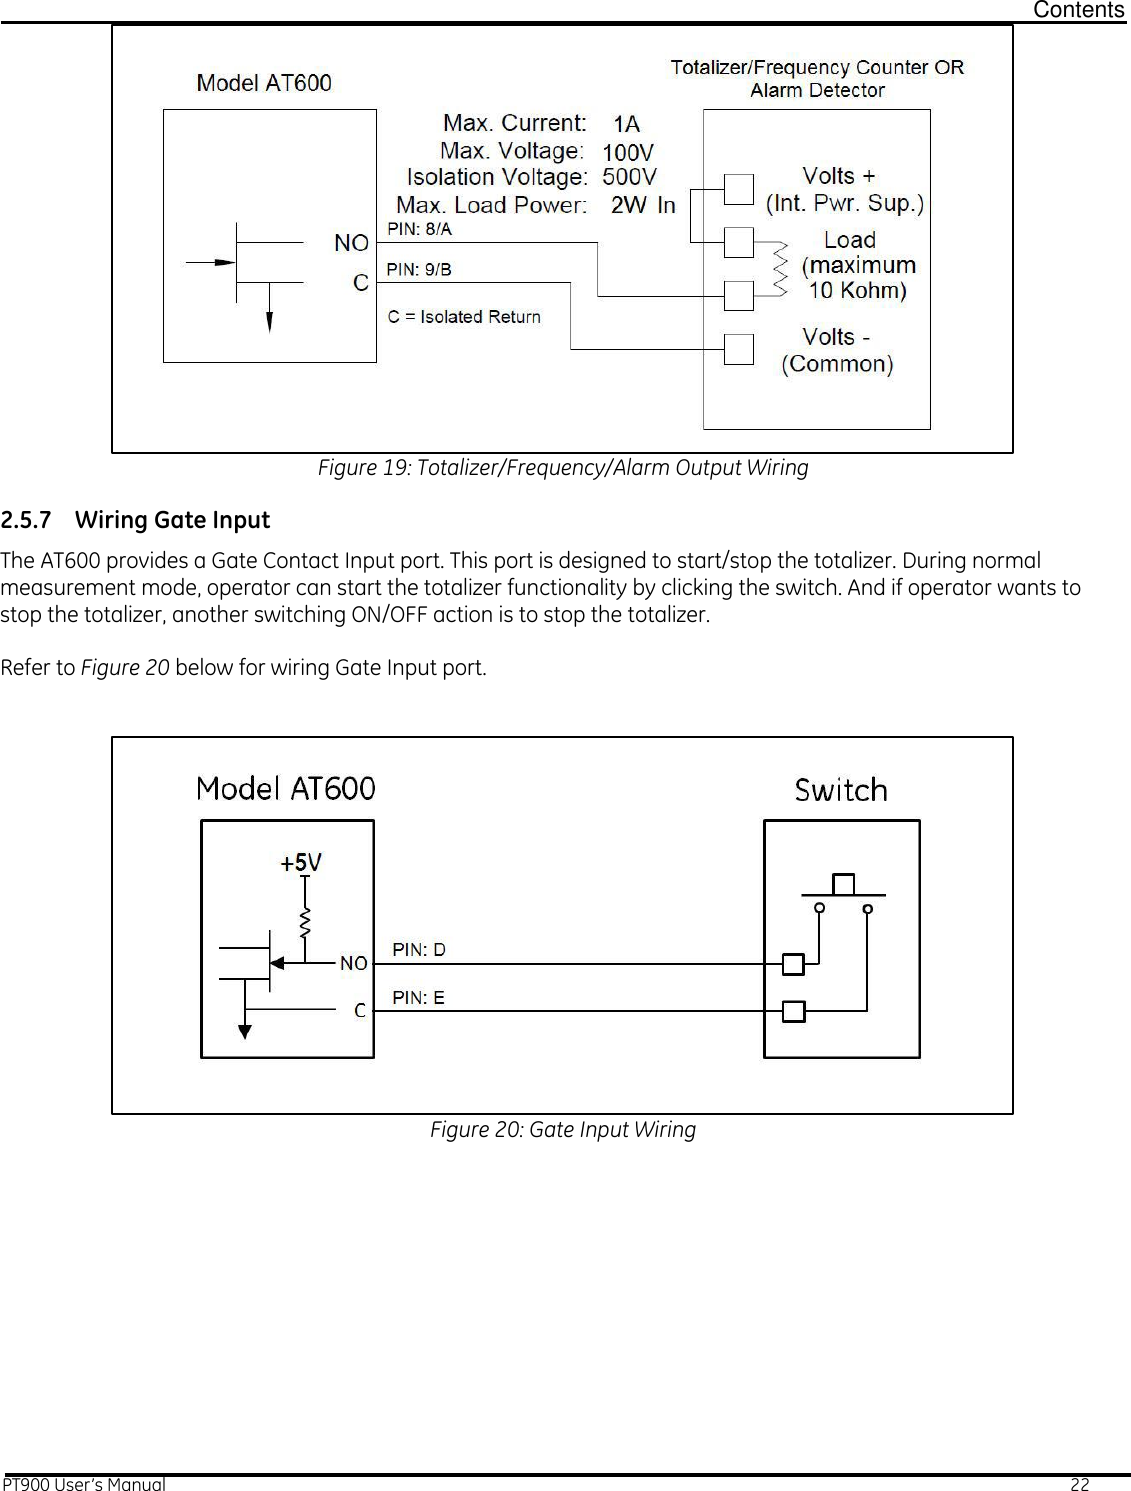  Contents PT900 User’s Manual                                                                                                                                                                                                                22  Figure 19: Totalizer/Frequency/Alarm Output Wiring 2.5.7 Wiring Gate Input The AT600 provides a Gate Contact Input port. This port is designed to start/stop the totalizer. During normal measurement mode, operator can start the totalizer functionality by clicking the switch. And if operator wants to stop the totalizer, another switching ON/OFF action is to stop the totalizer.  Refer to Figure 20 below for wiring Gate Input port.     Figure 20: Gate Input Wiring    